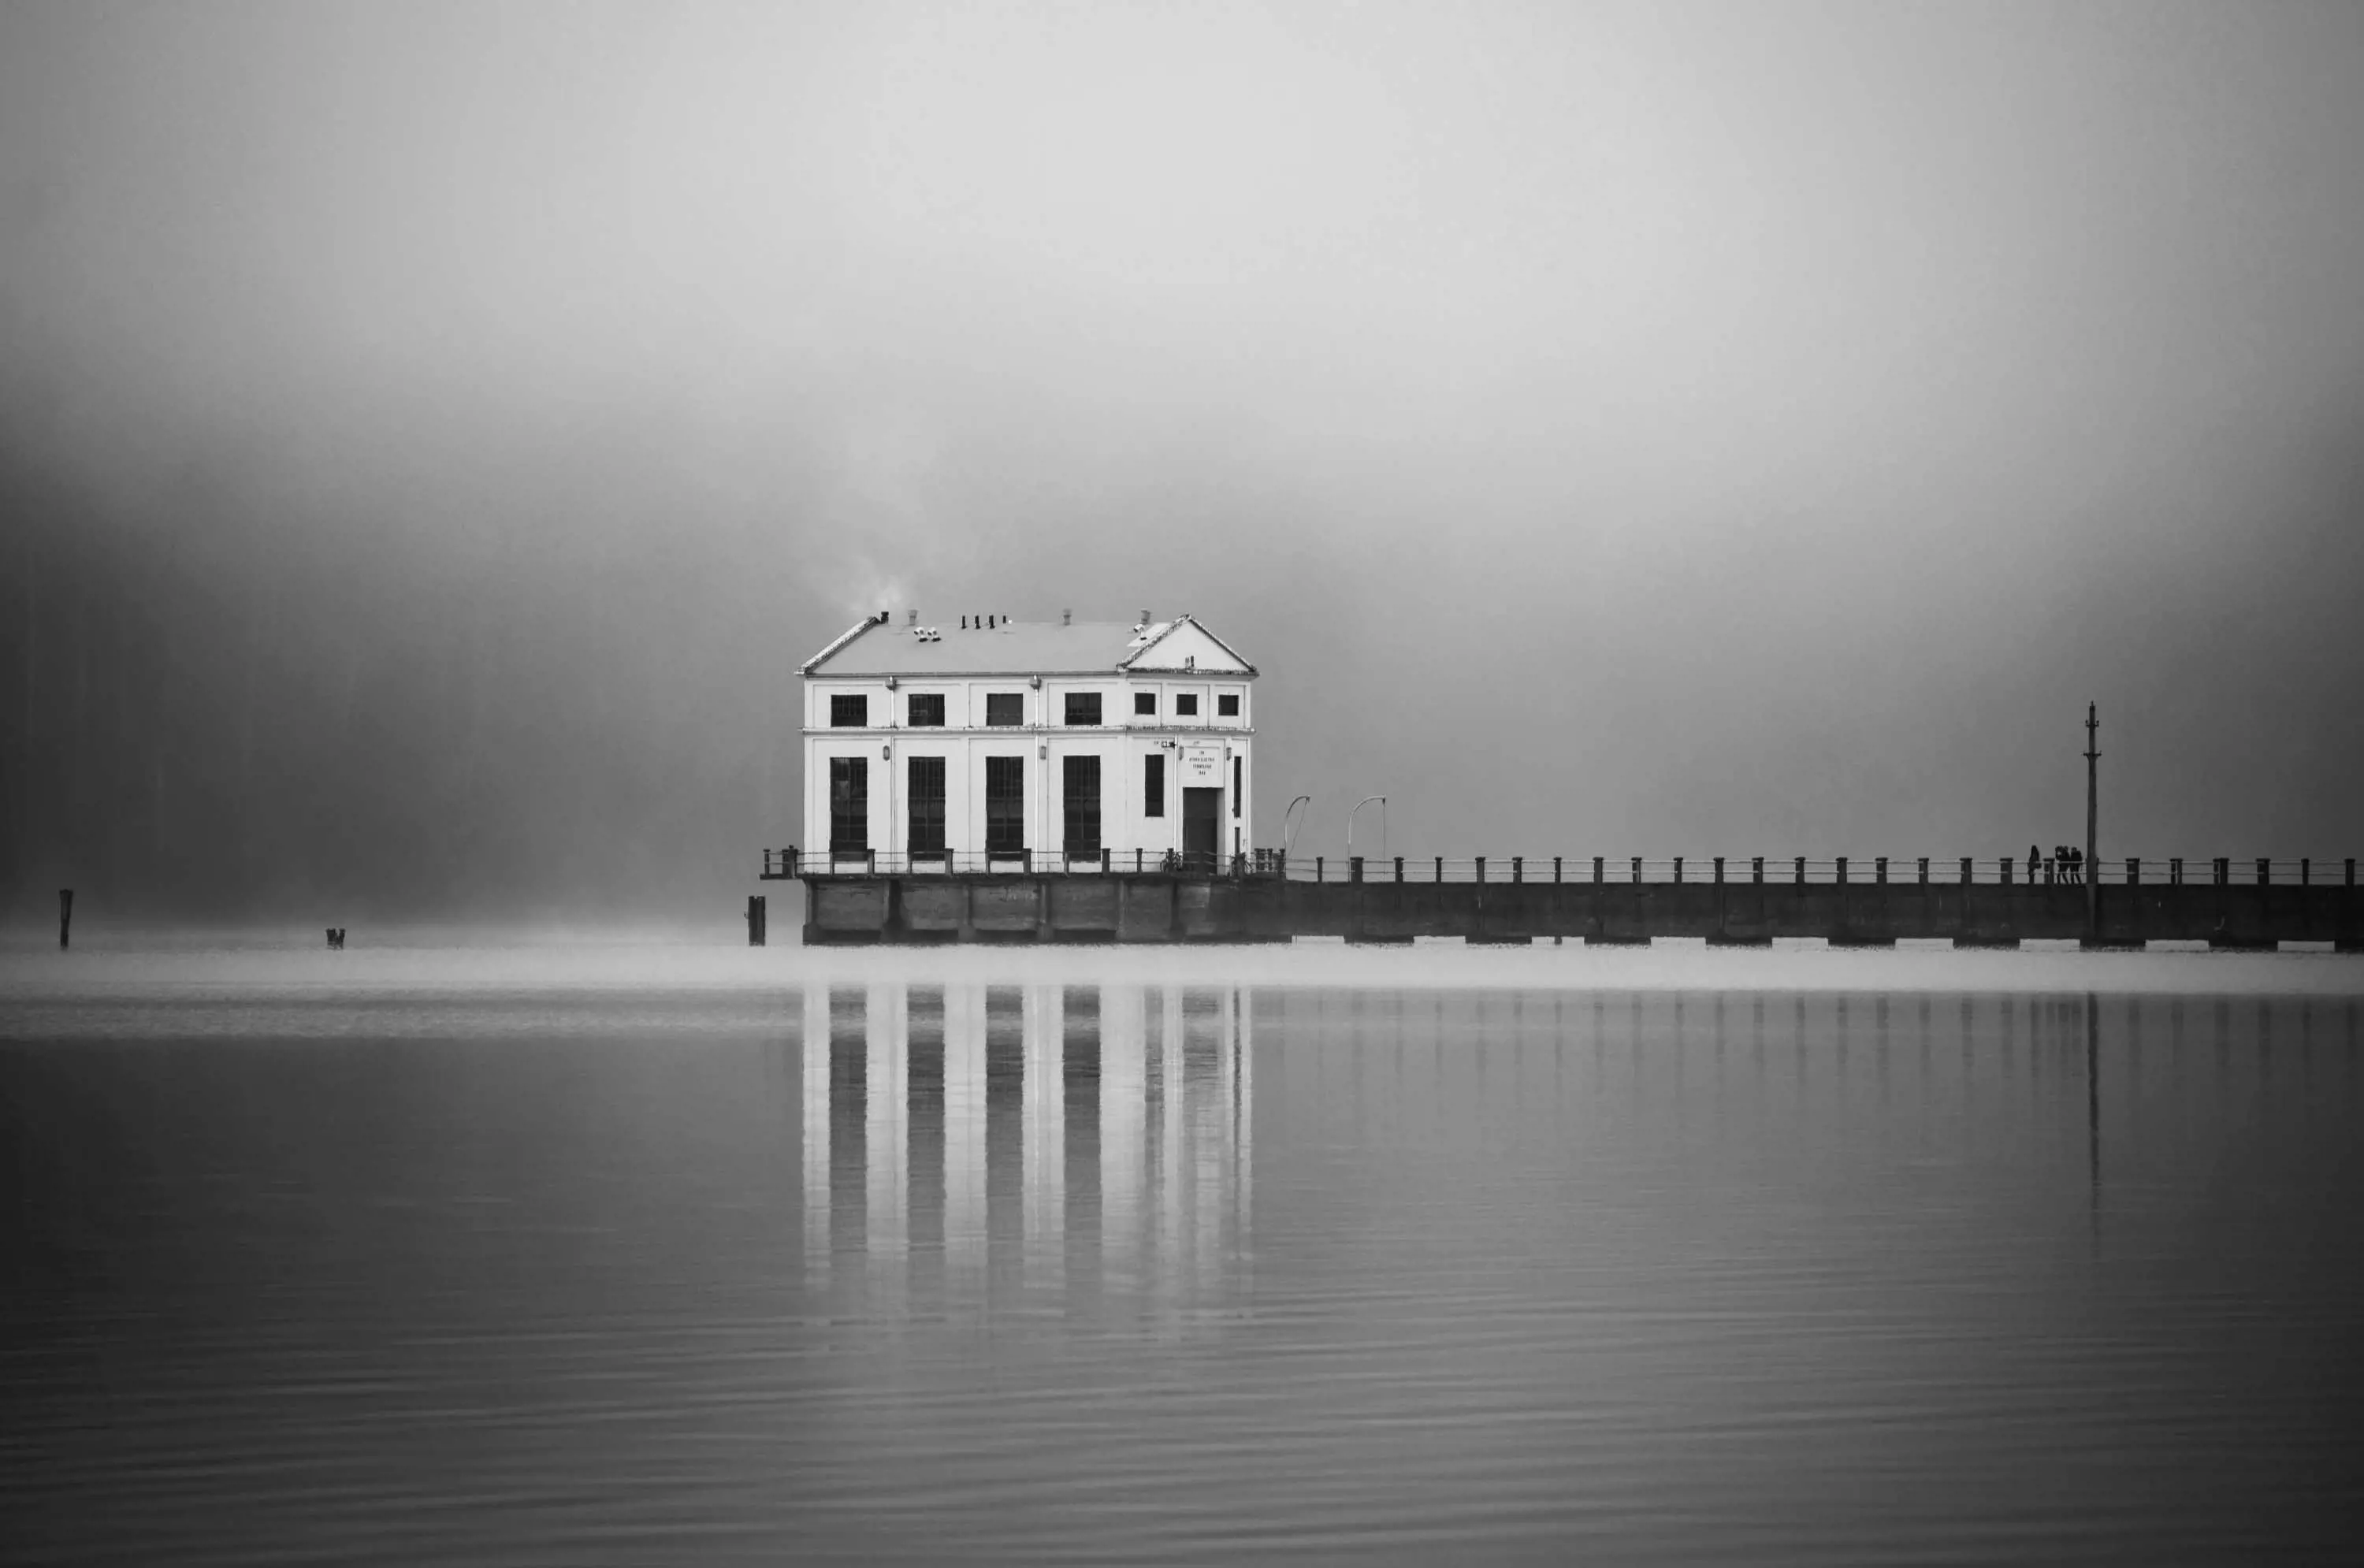 An old, white, shed like building at the end of a long pier is reflected in the still water of a lake.